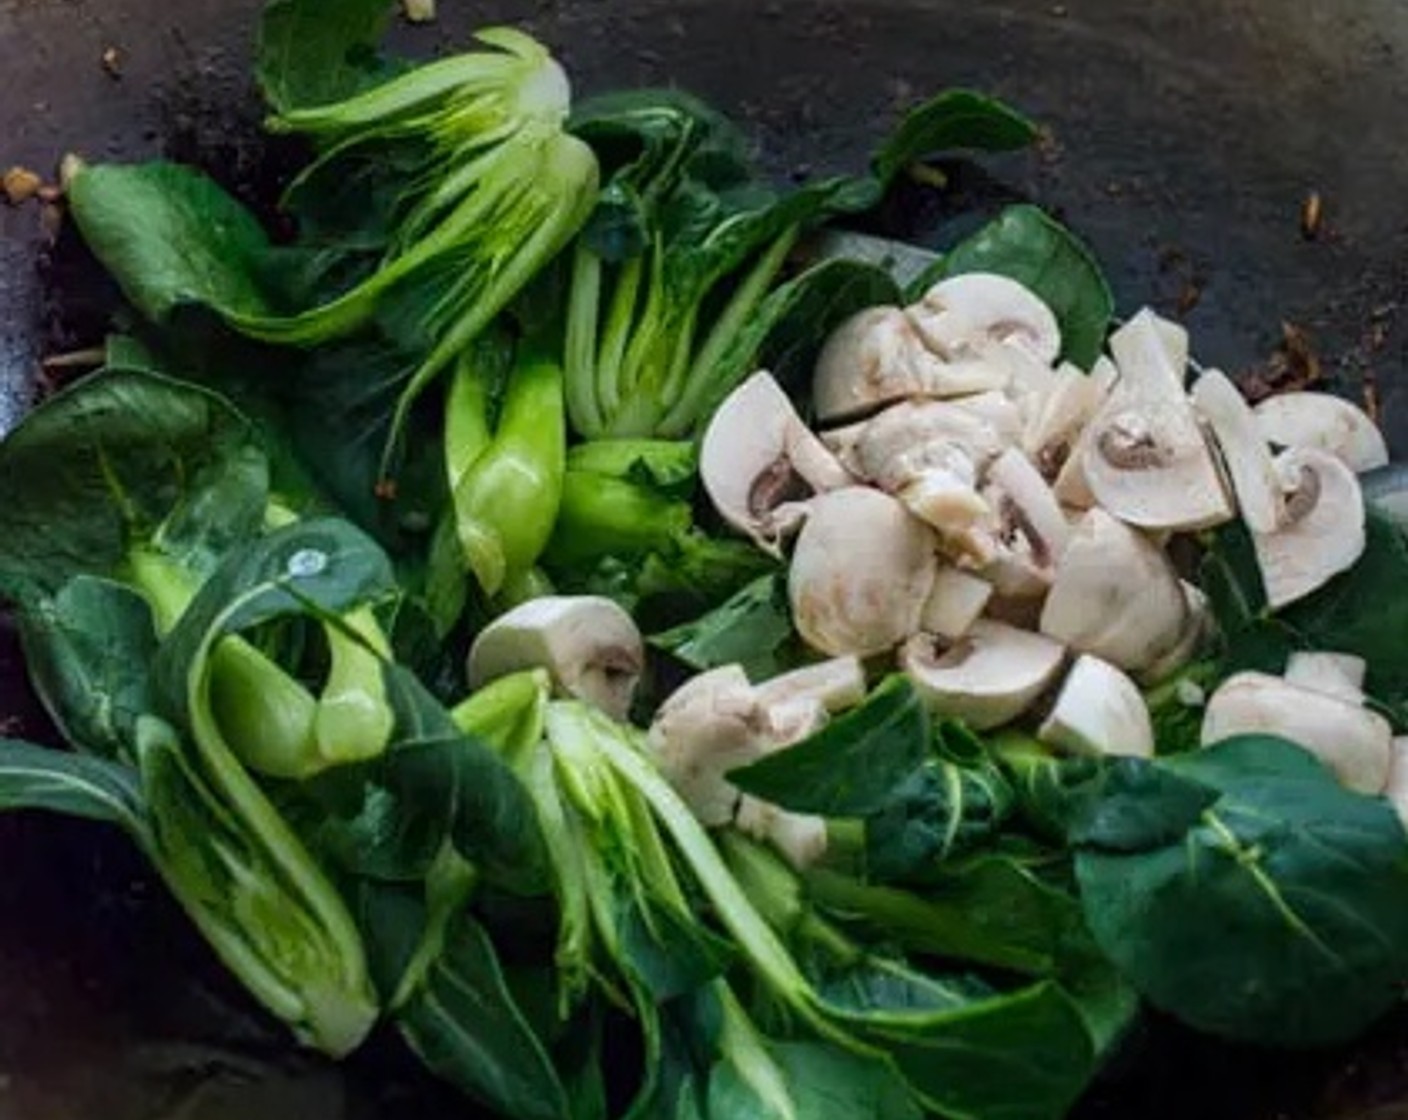 step 5 When the chicken is fully cooked, remove the chicken from the wok. Add Baby Bok Choy (3 cups) and Mushroom (1 cup) to the wok. Stir fry for about 1 minute.